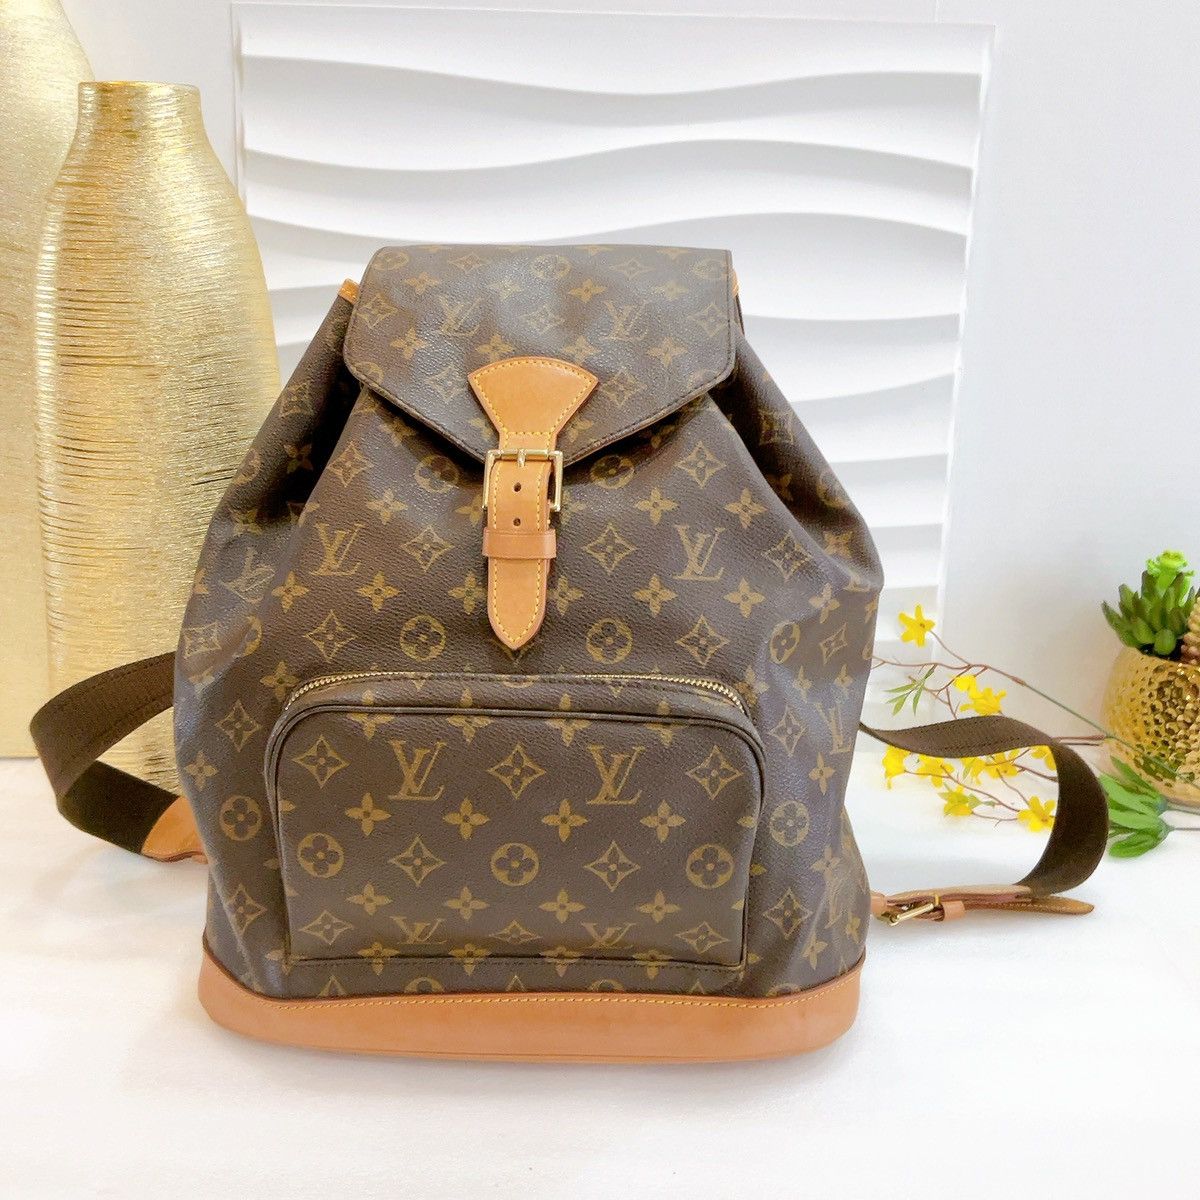 Louis Vuitton % Authentic Montsouris GM backpack - $1700 - From